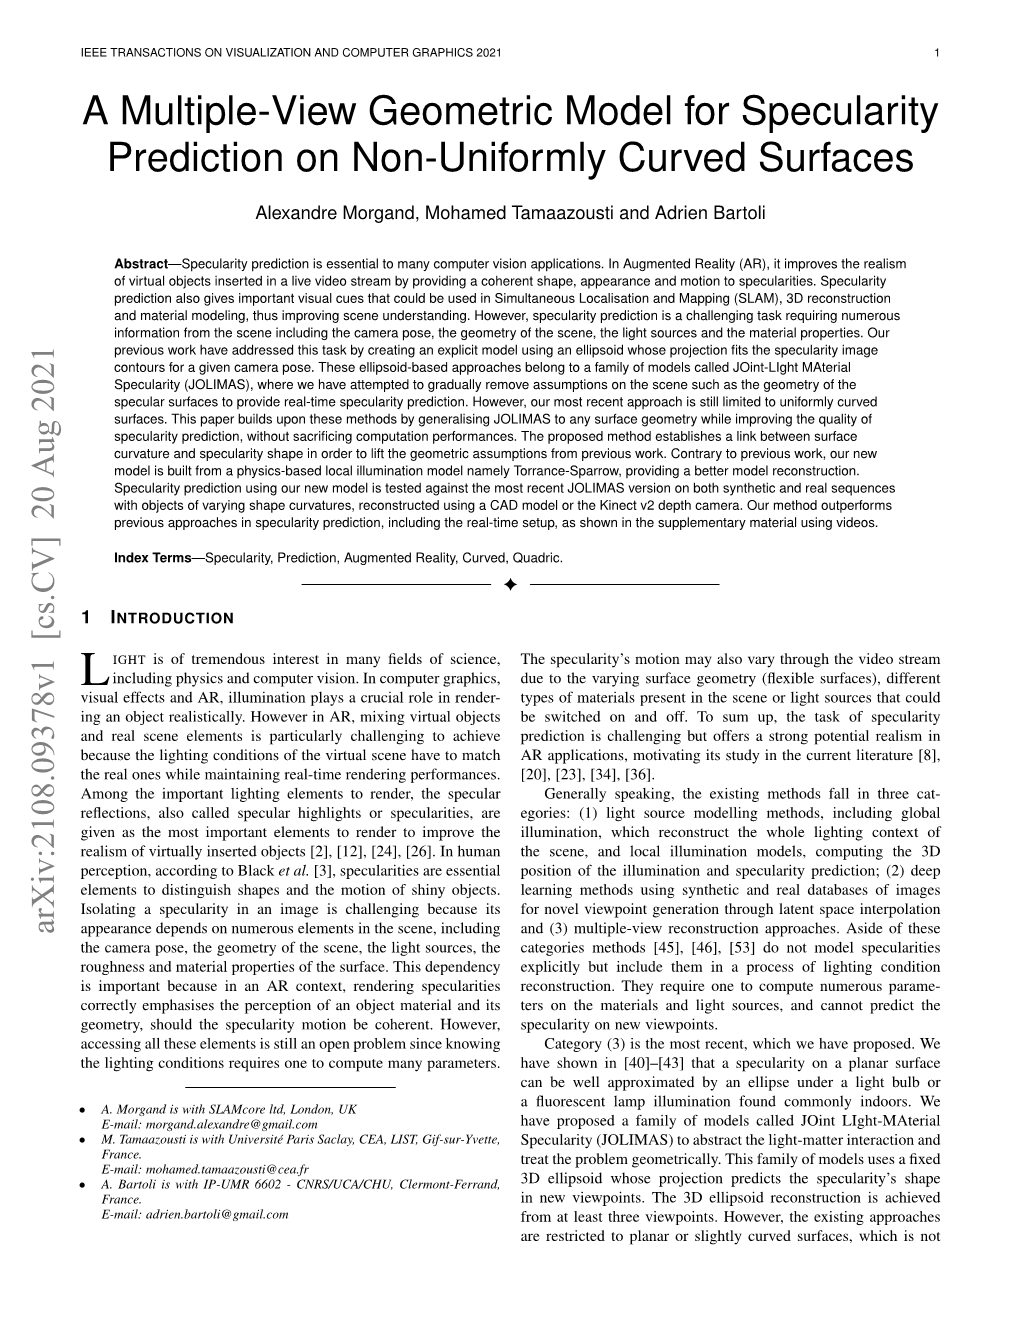 A Multiple-View Geometric Model for Specularity Prediction on Non-Uniformly Curved Surfaces